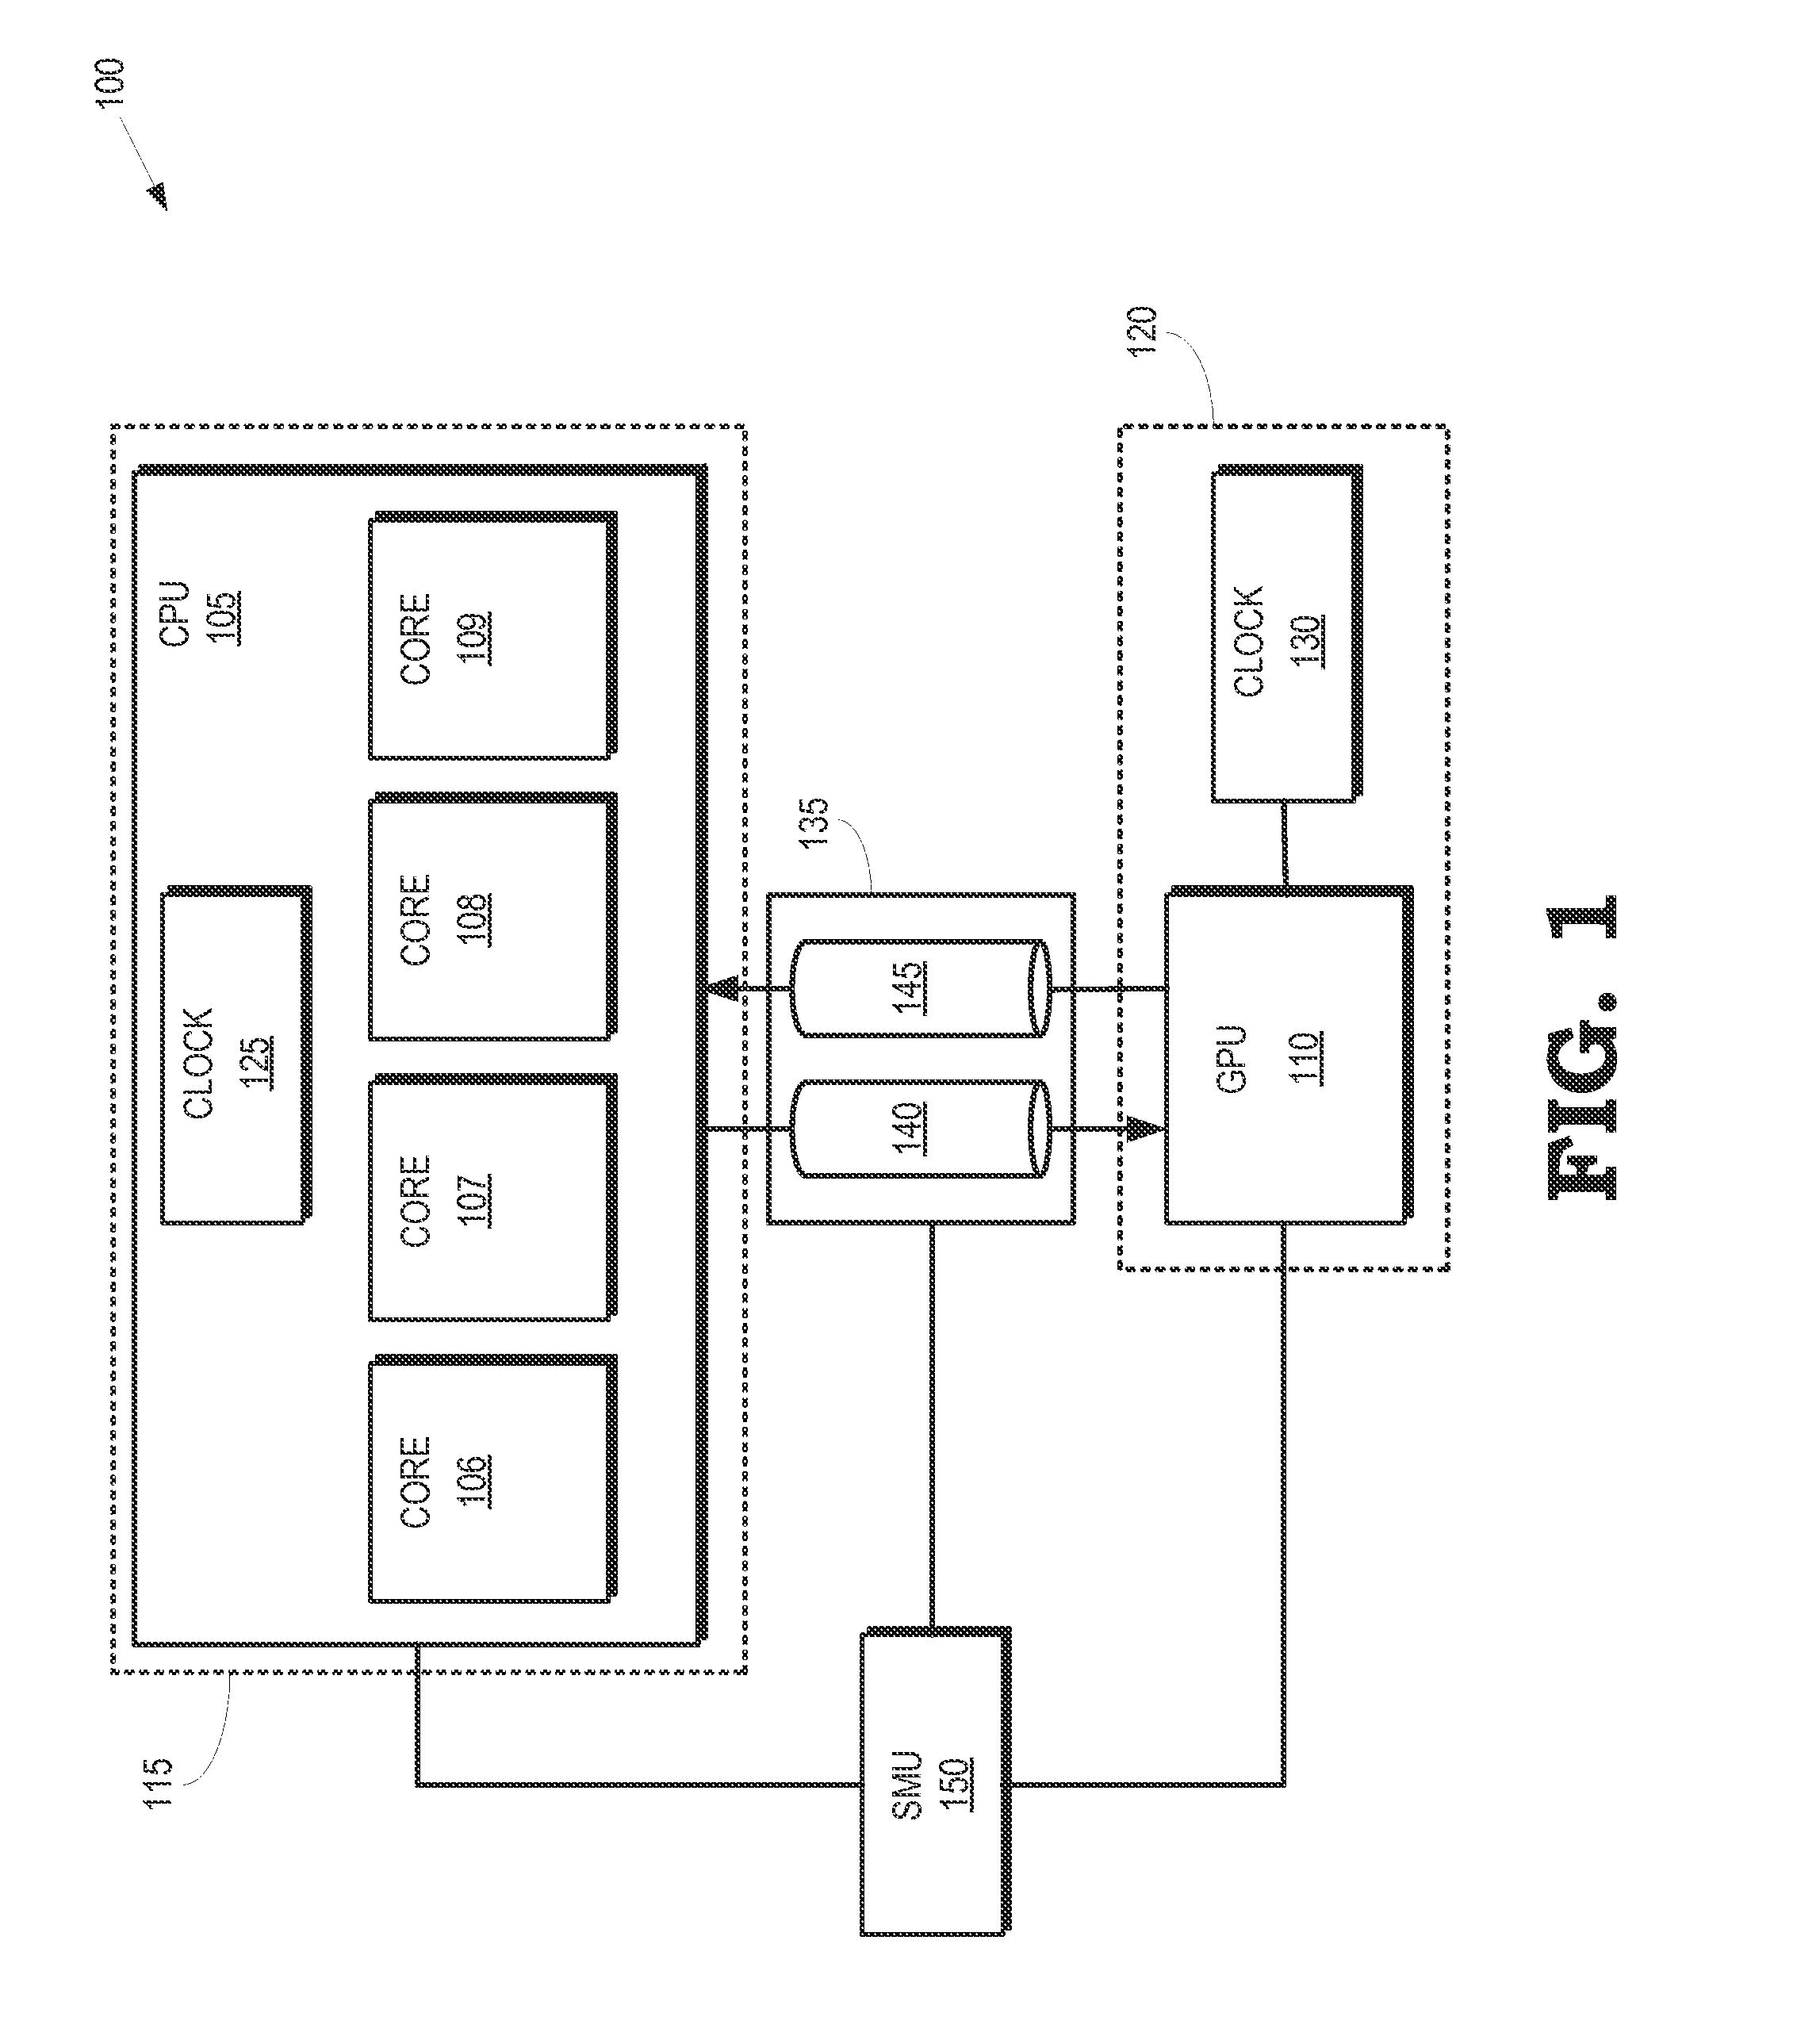 Frequency configuration of asynchronous timing domains under power constraints